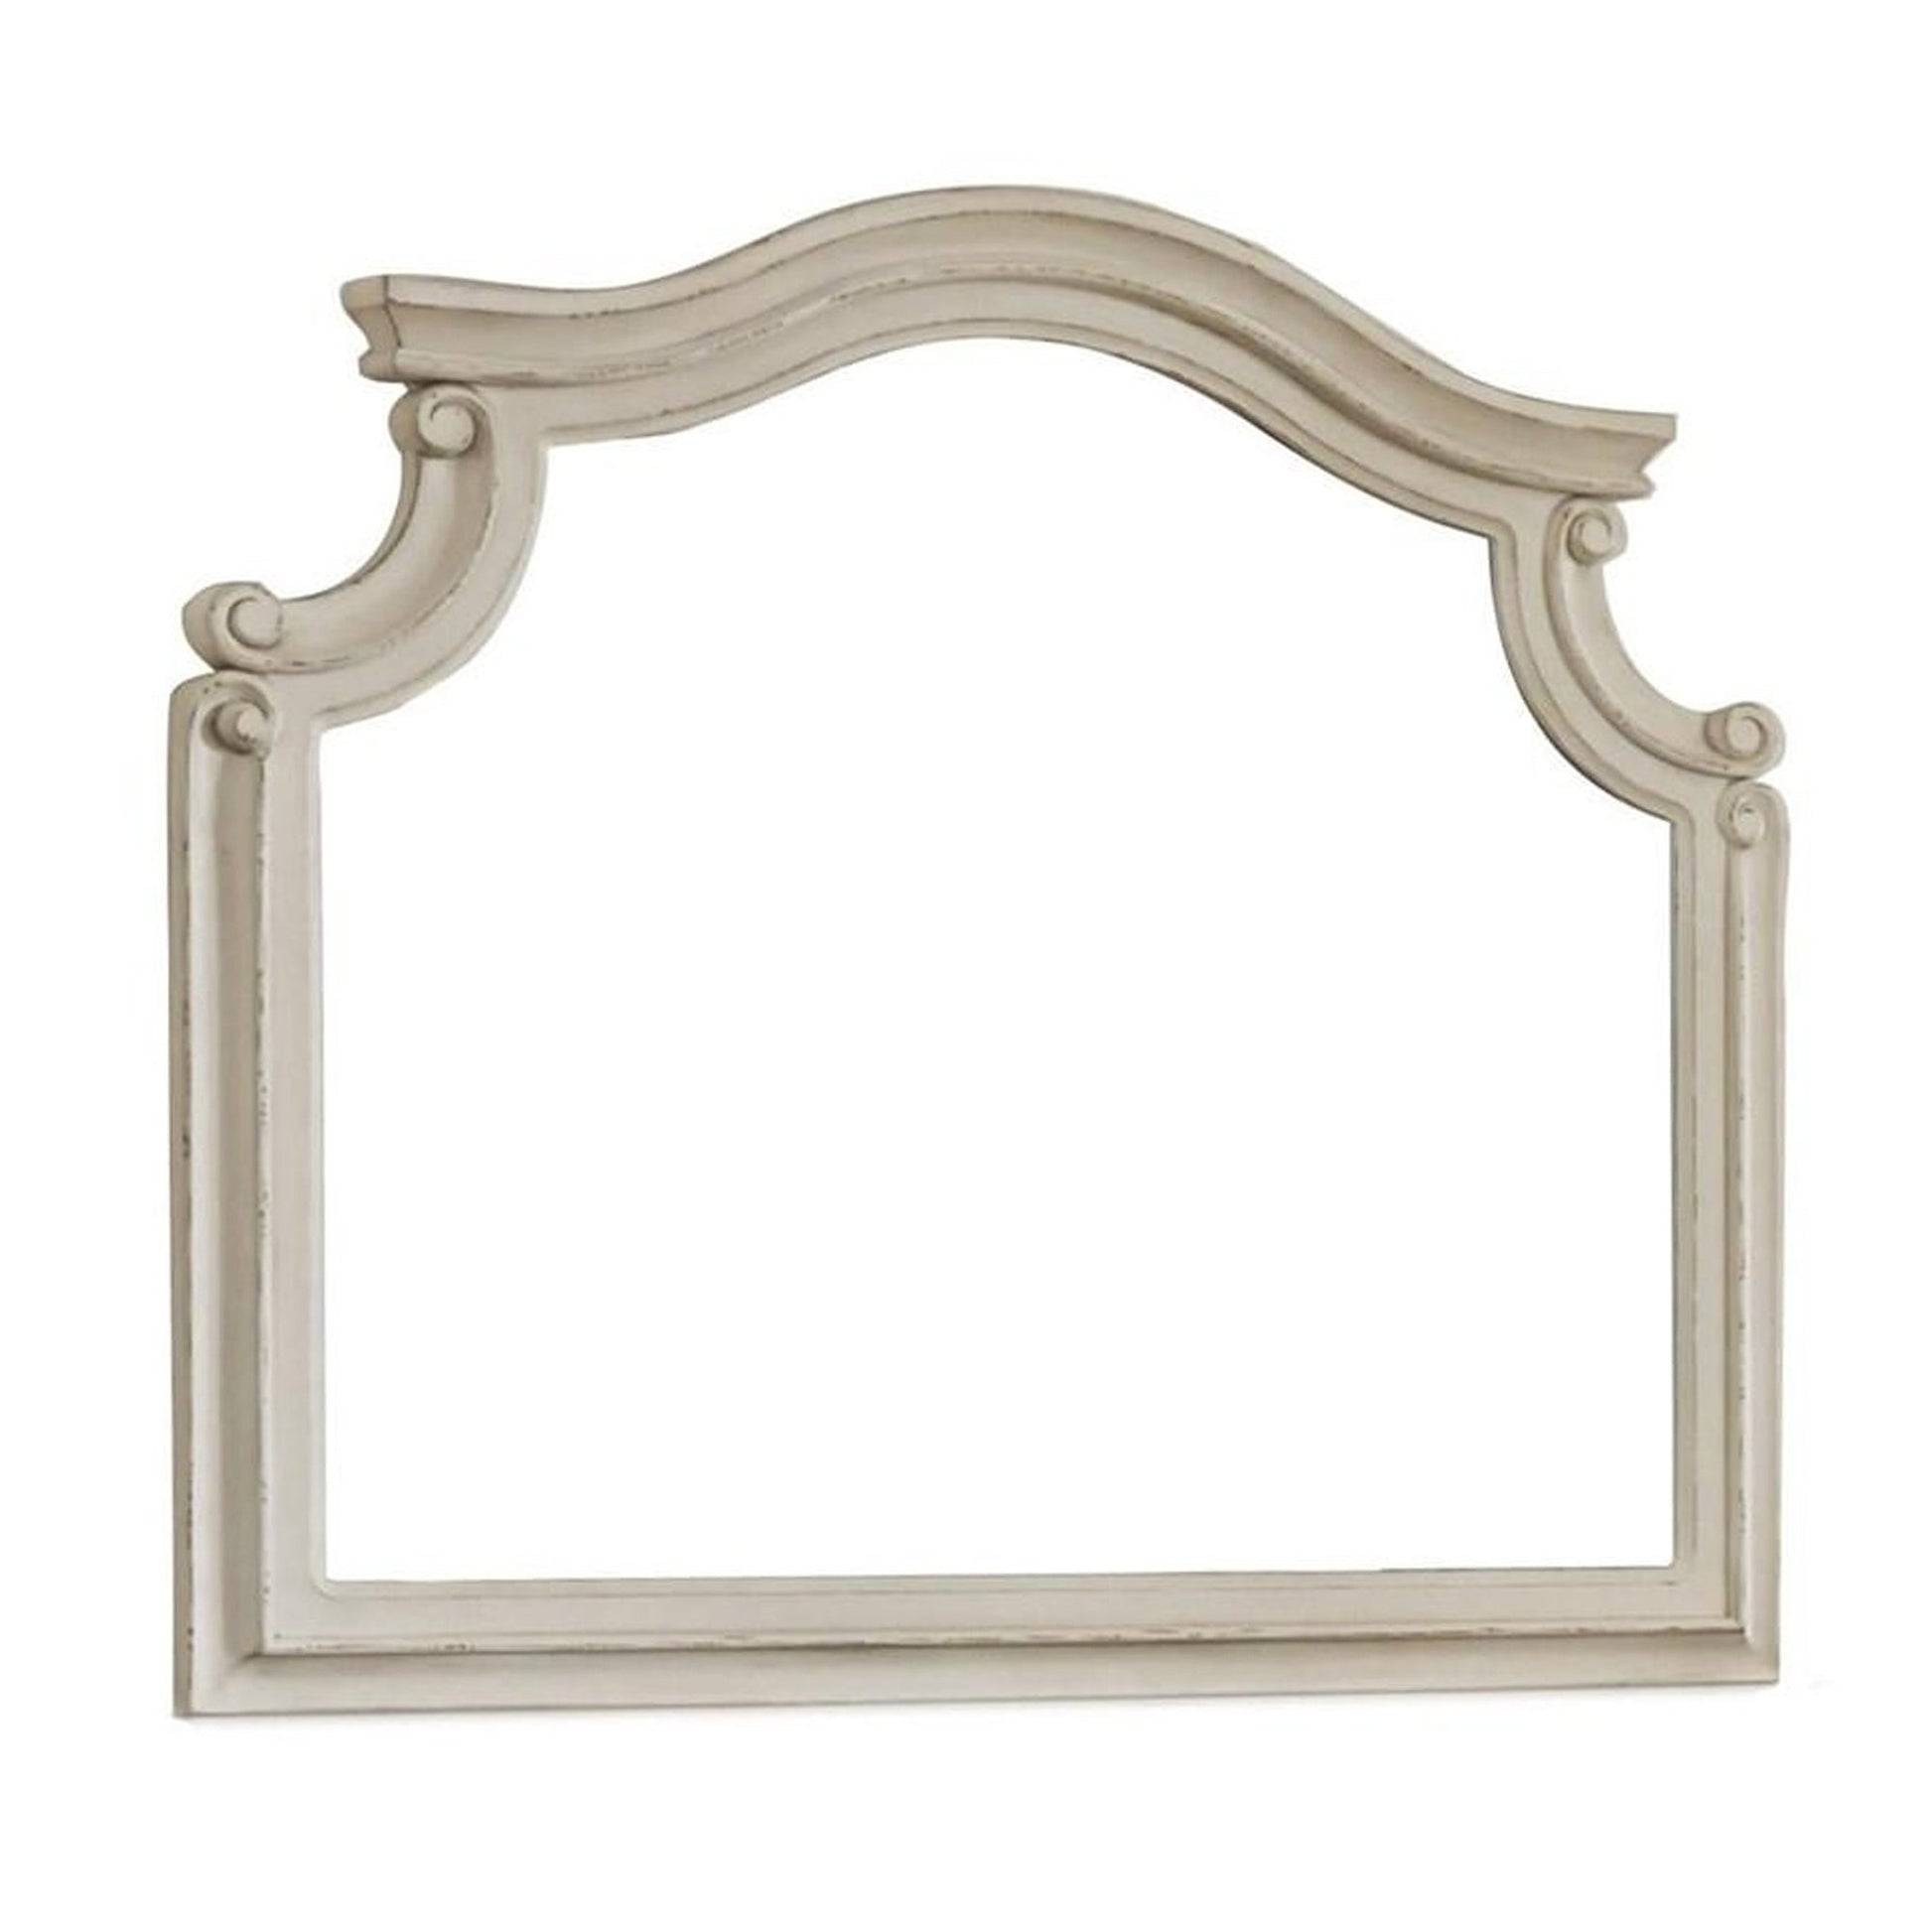 Benzara 44" Antique White Scalloped Top Wood Framed Wall Mirror